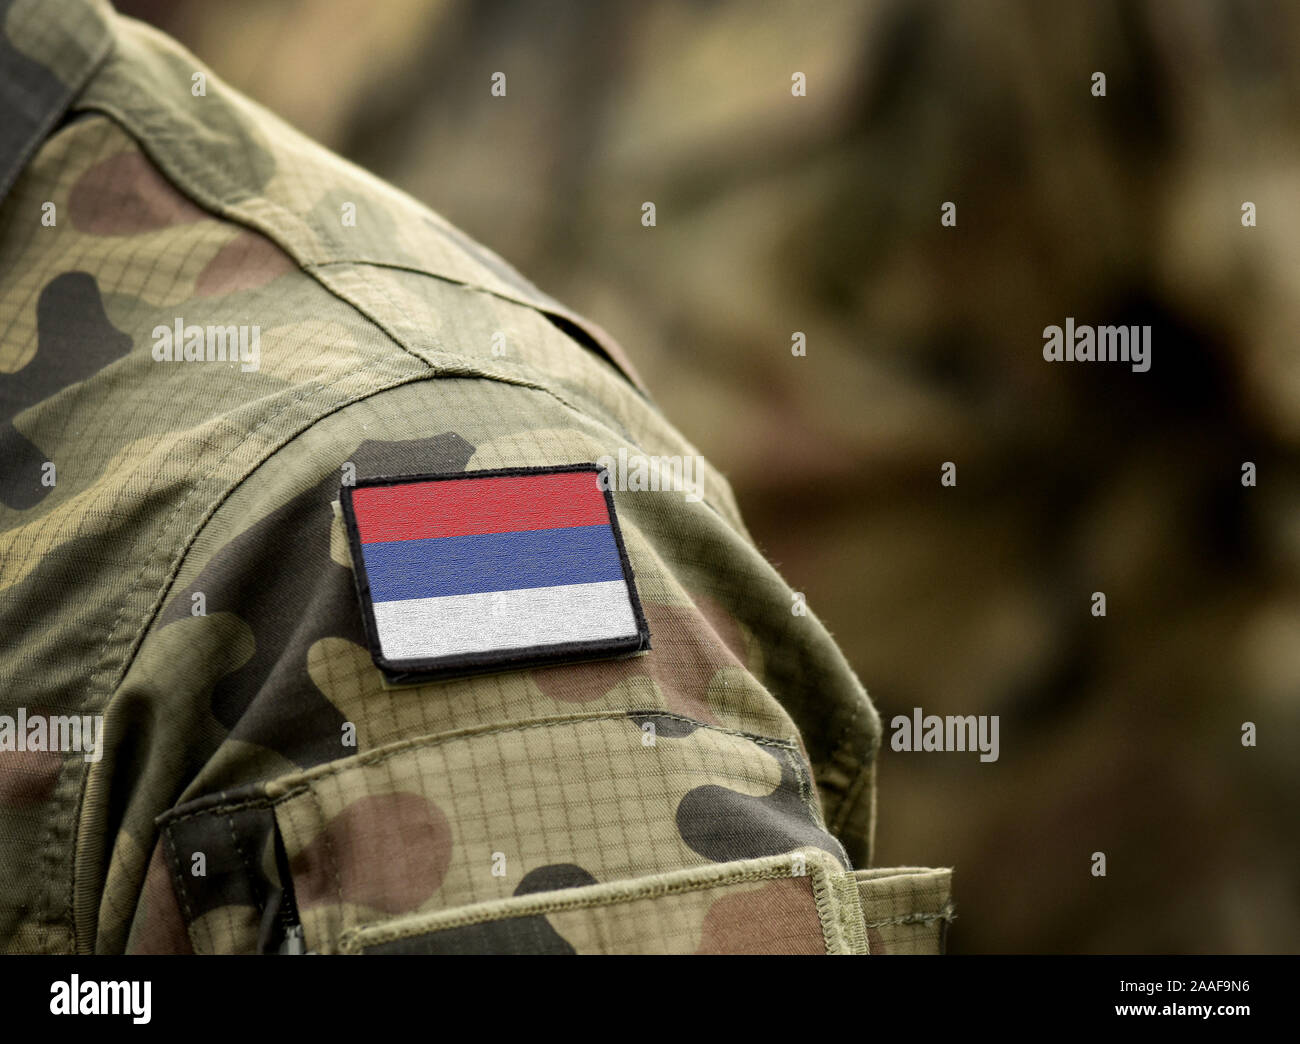 Flag of Republika Srpska on military uniform. Army, armed forces, soldiers. Collage. Stock Photo